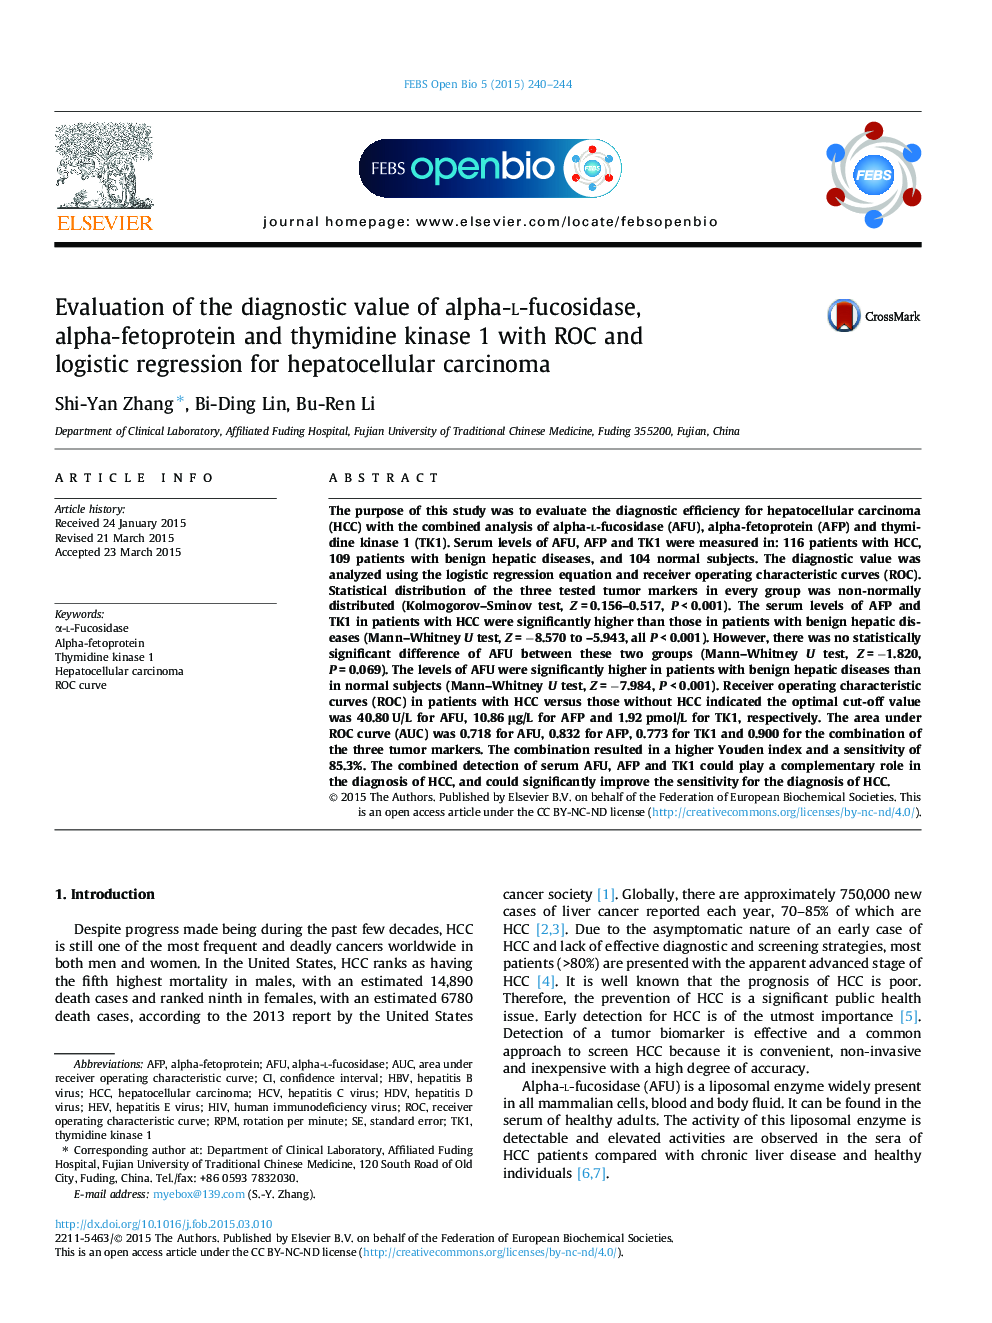 Evaluation of the diagnostic value of alpha-l-fucosidase, alpha-fetoprotein and thymidine kinase 1 with ROC and logistic regression for hepatocellular carcinoma